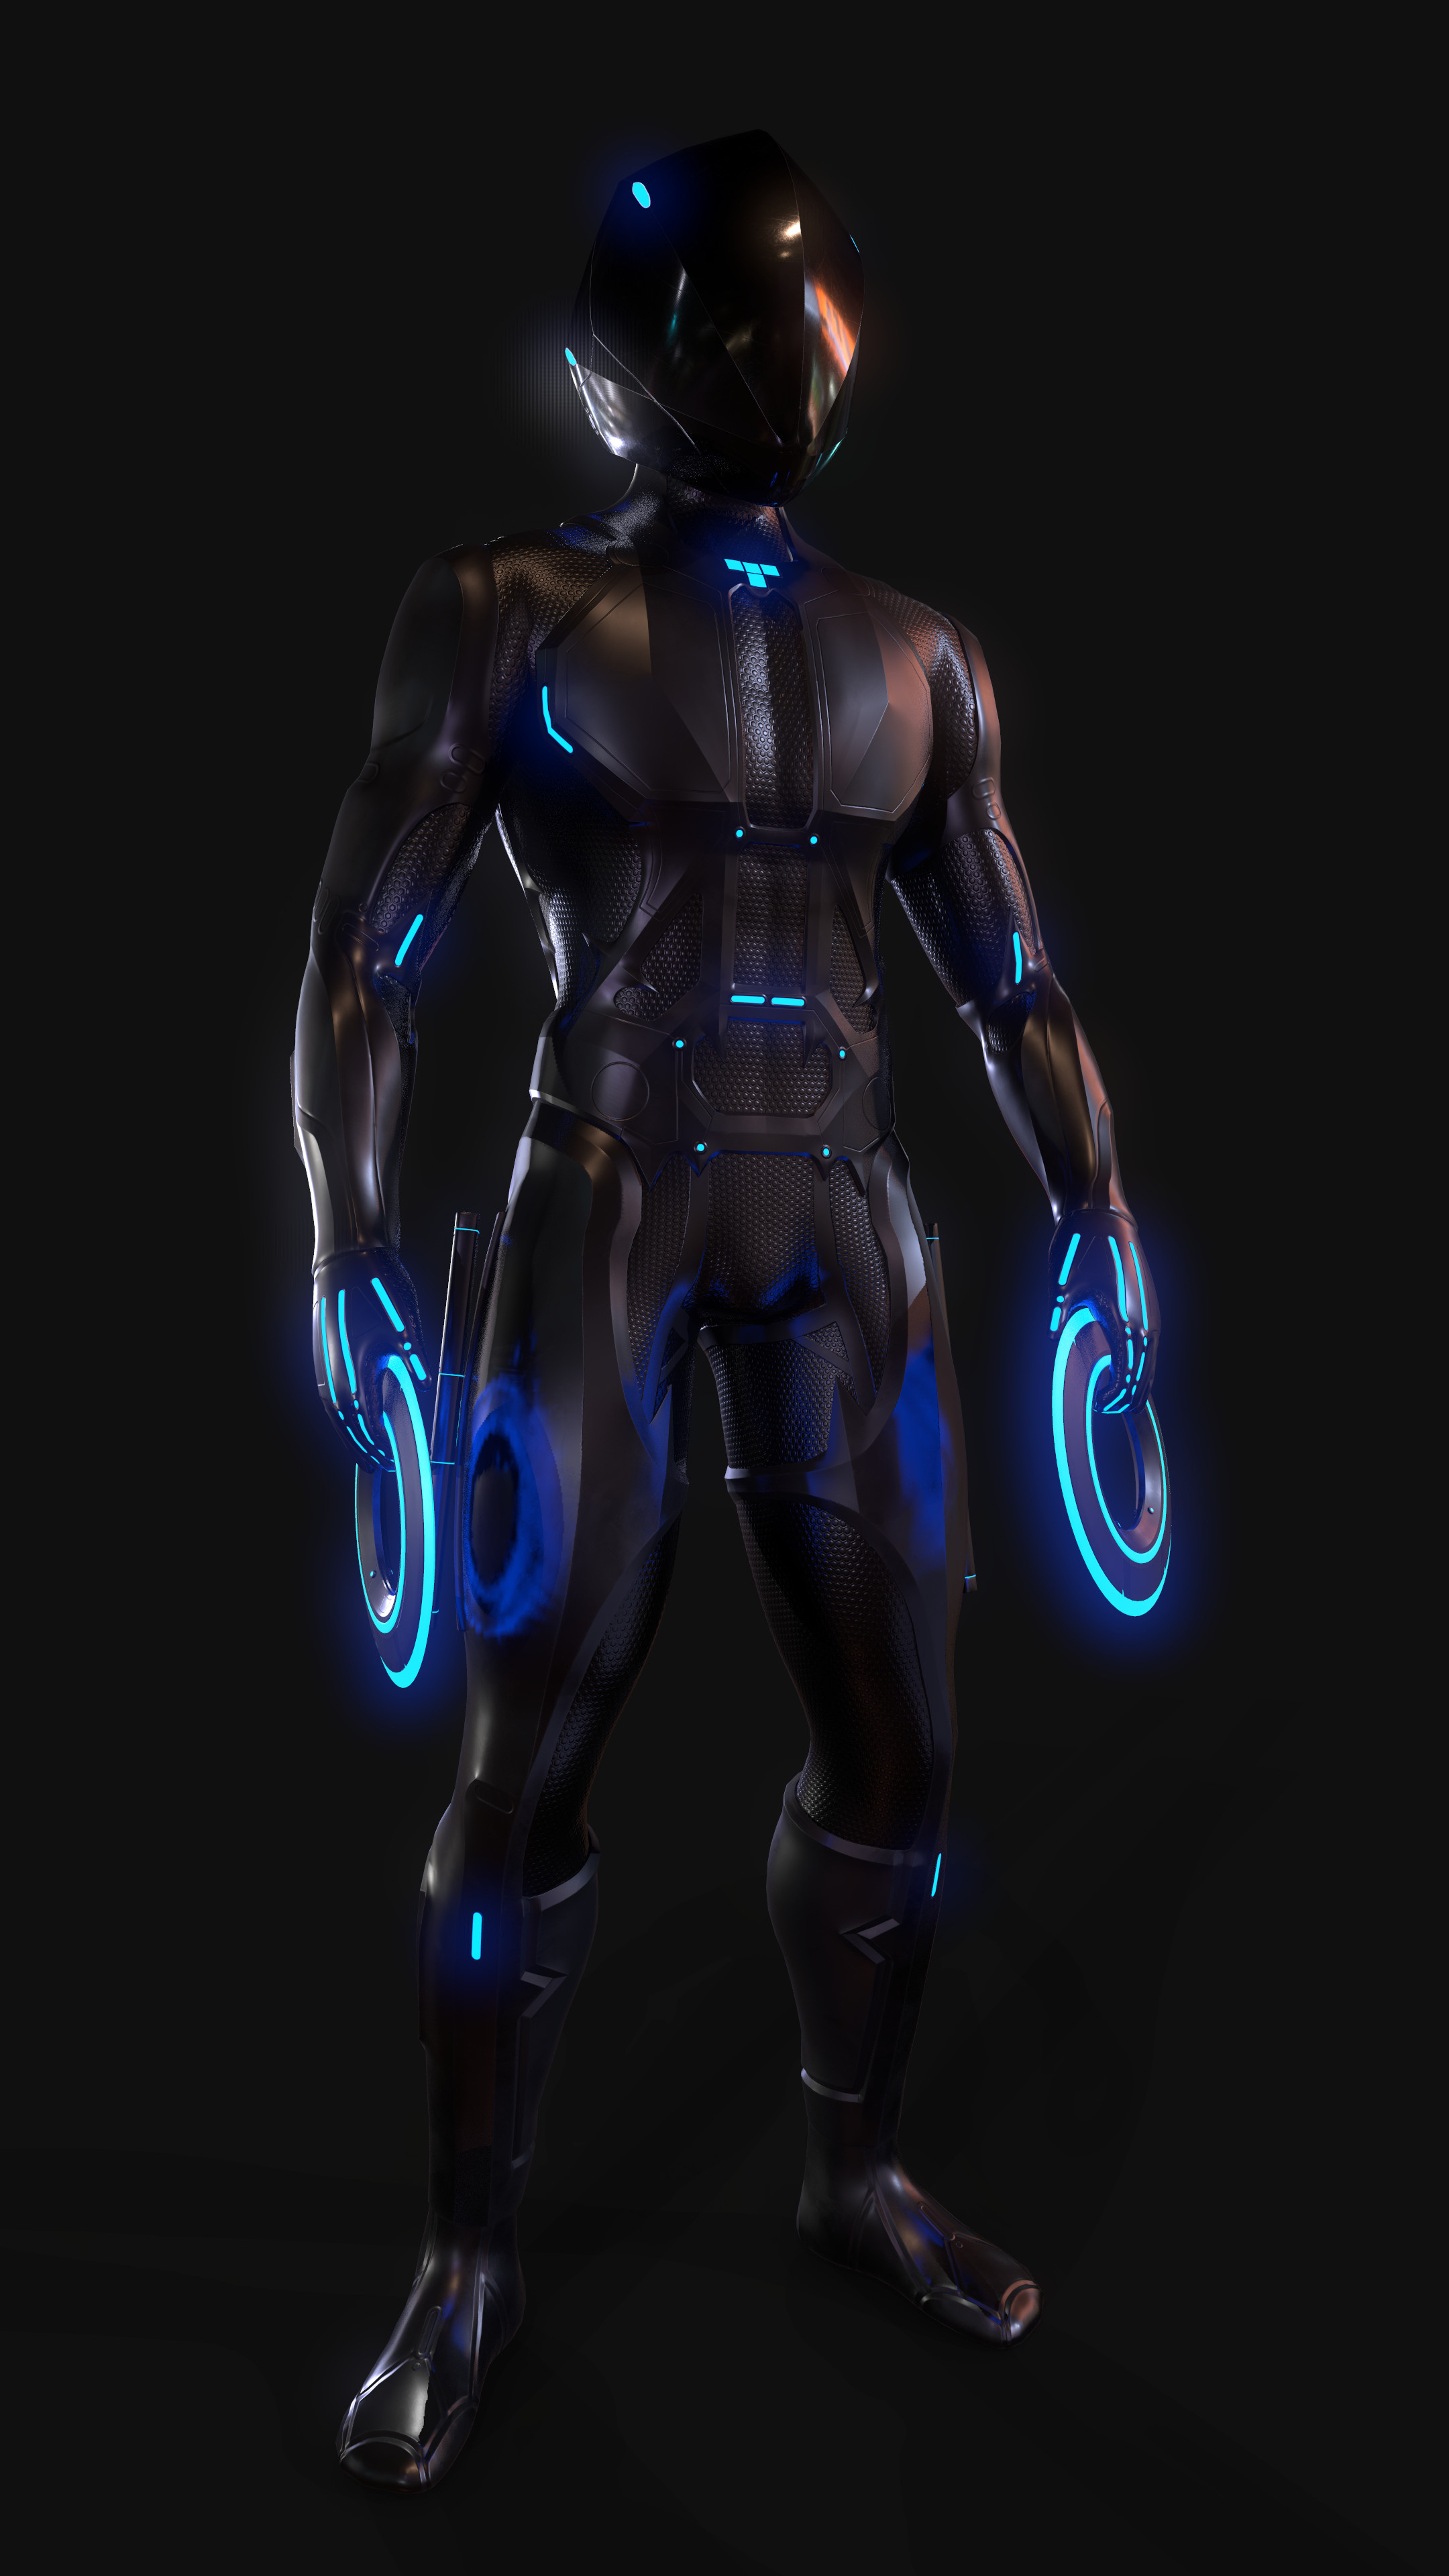 Tron (Movie): Legacy, Directed by Joseph Kosinski in his feature directorial debut. 2160x3840 4K Wallpaper.